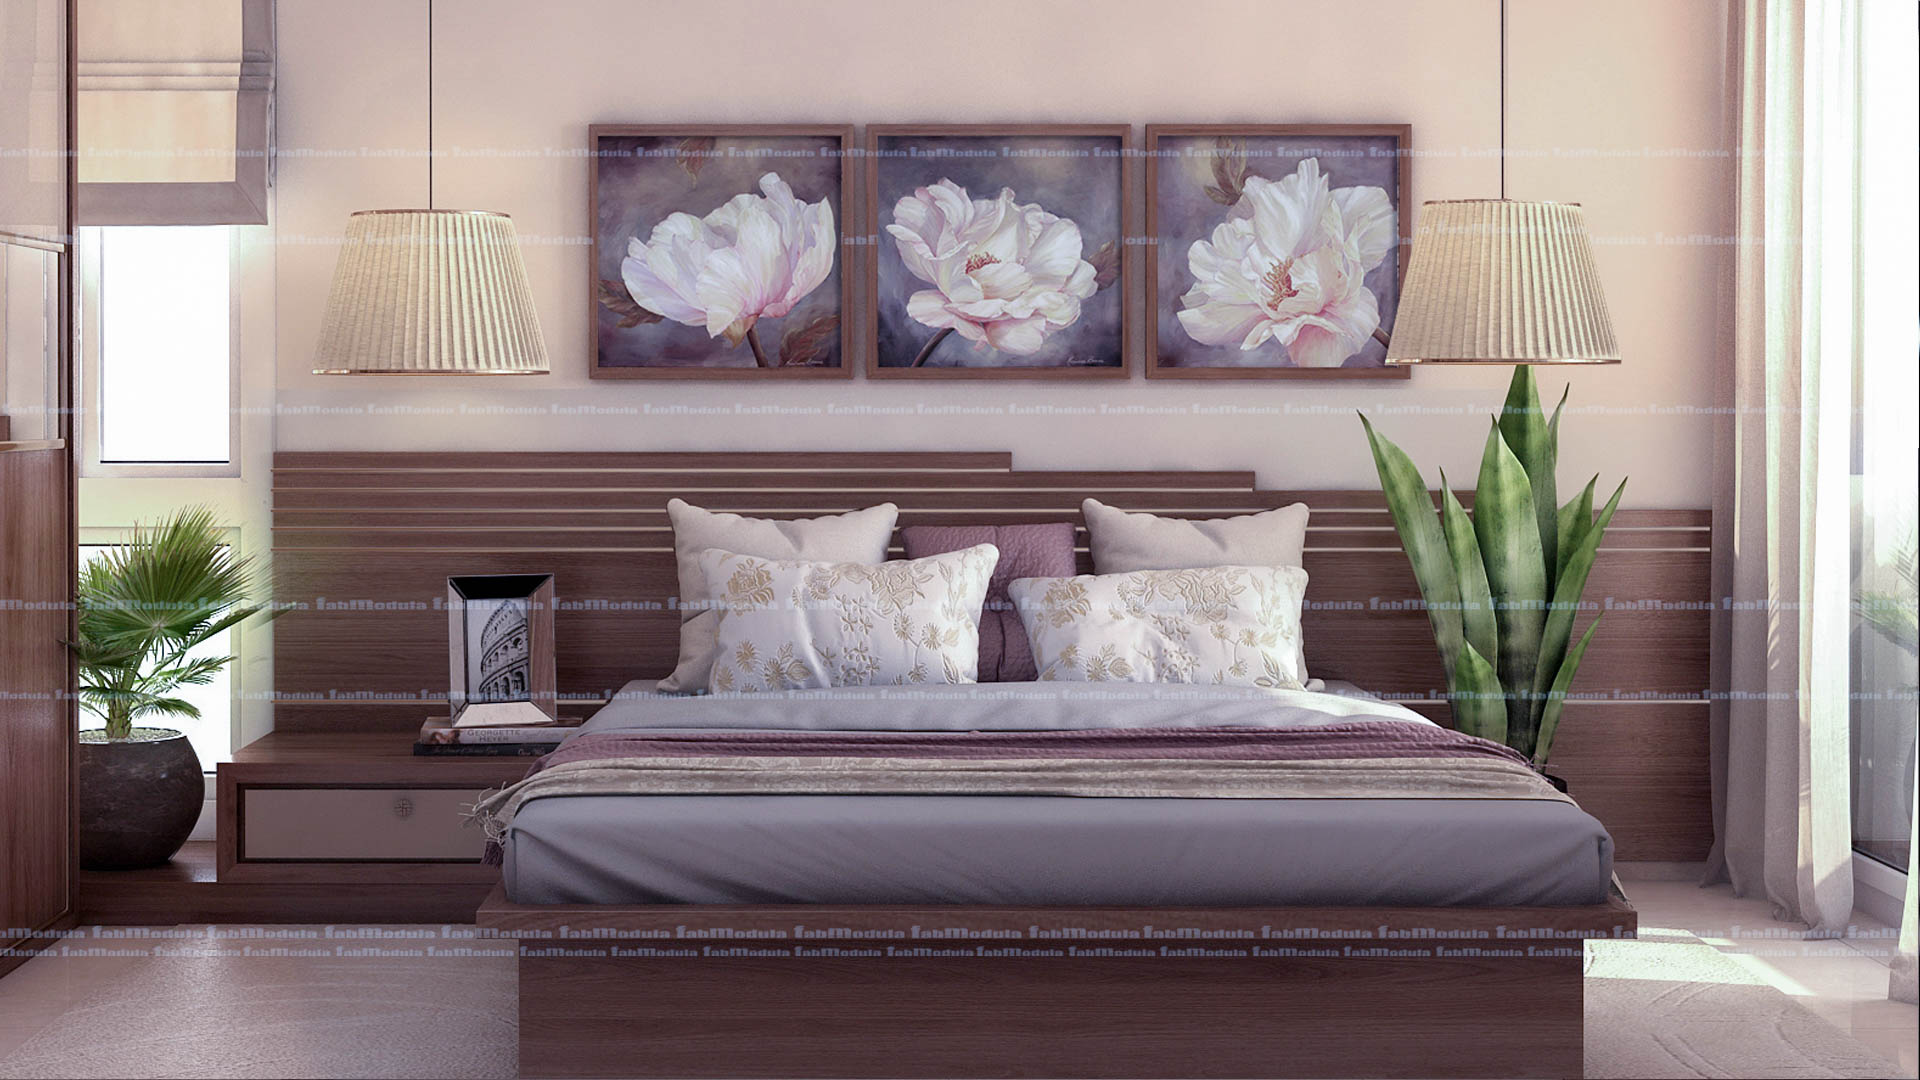 FabModula parents bedroom with pale color theme